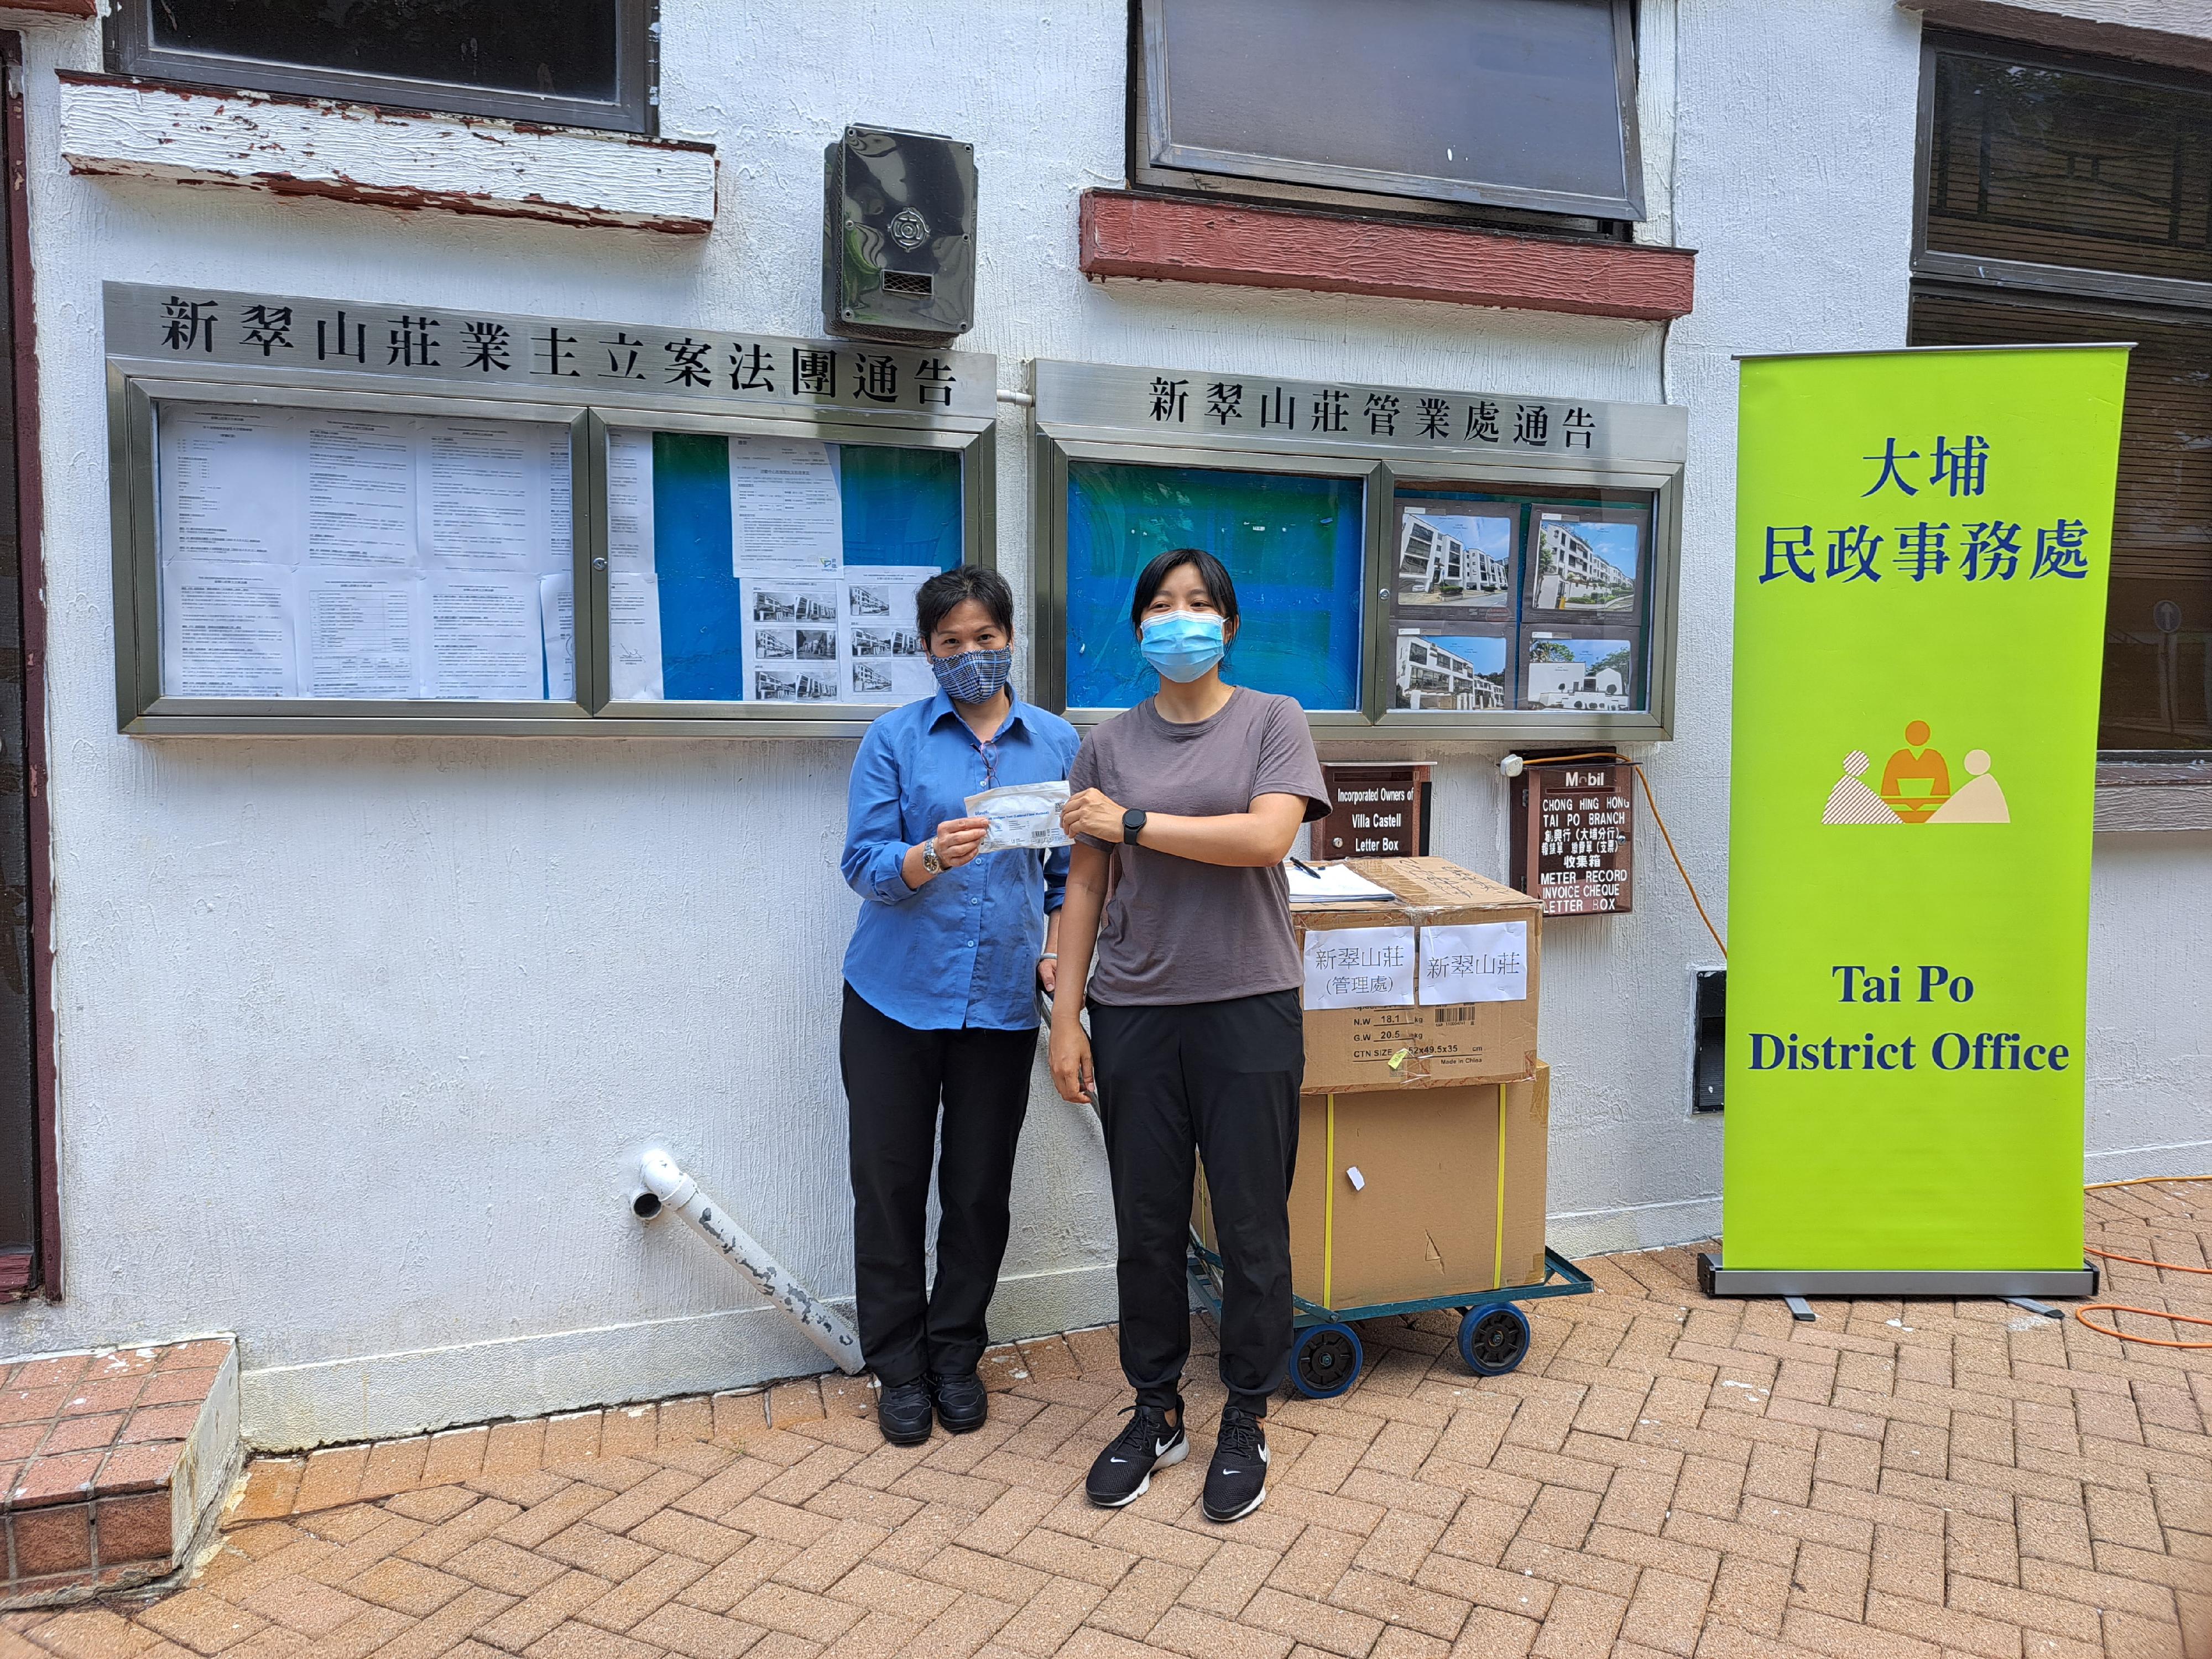 The Tai Po District Office today (July 26) distributed COVID-19 rapid test kits to households, cleansing workers and property management staff living and working in Villa Castell for voluntary testing through the property management company.

